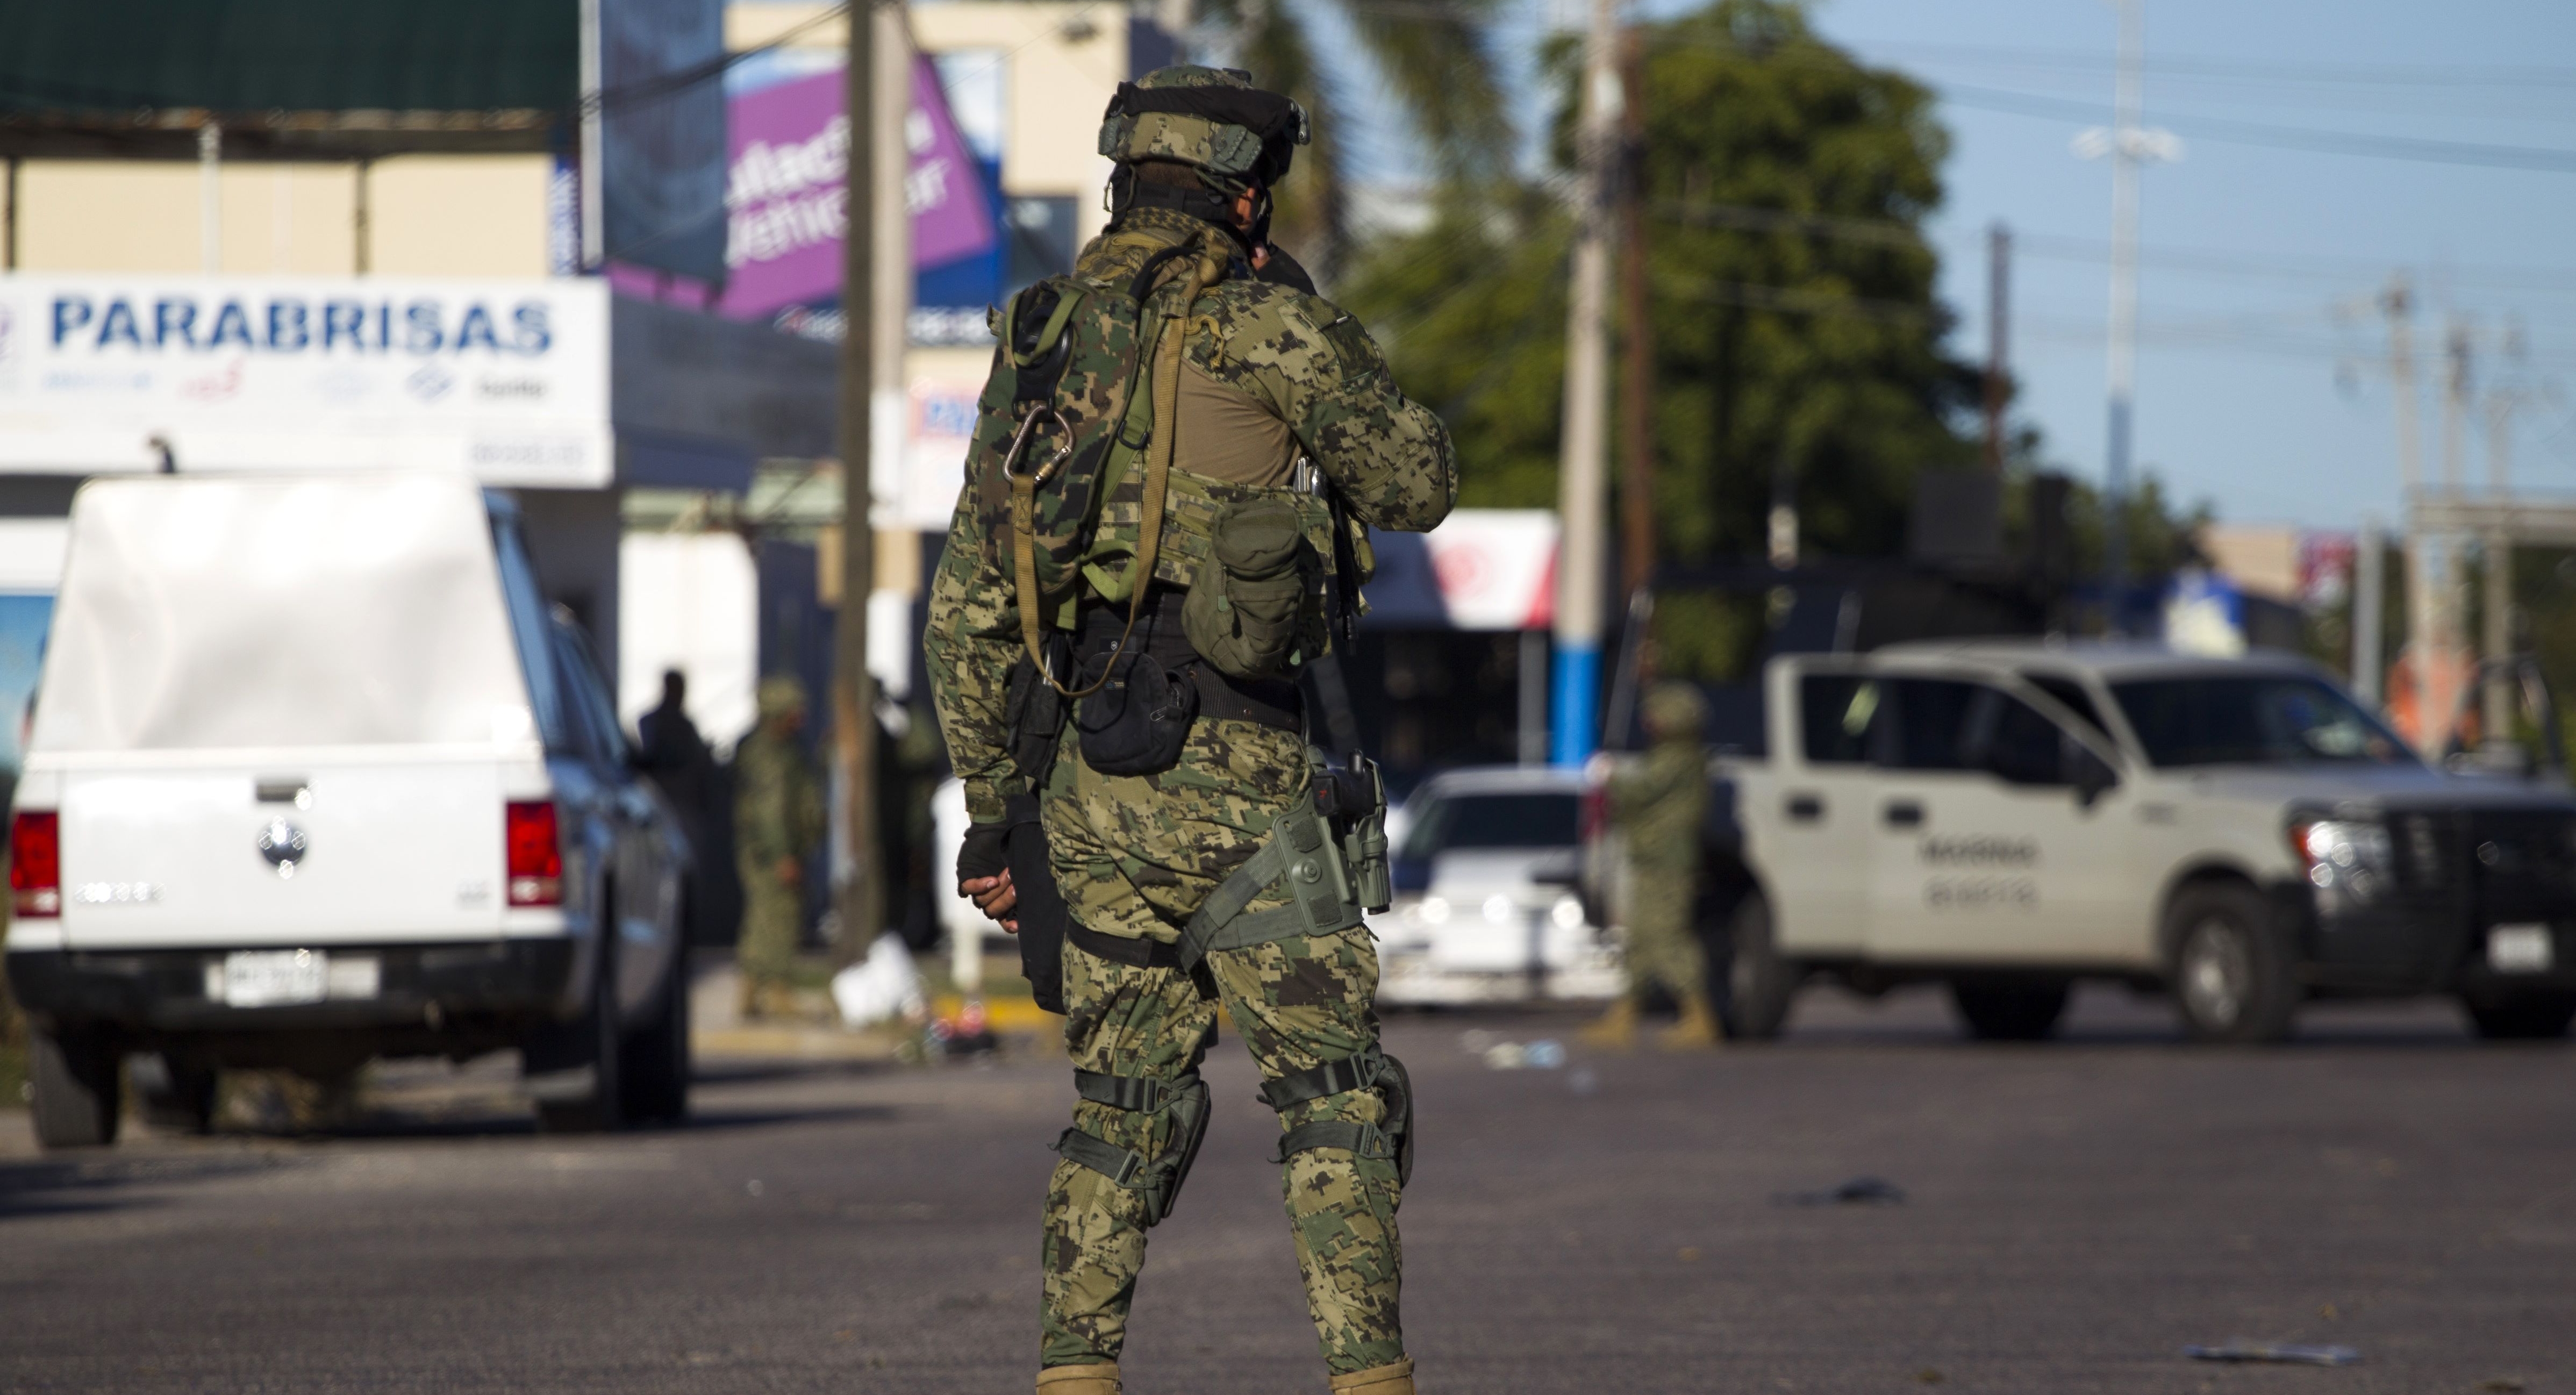 A marine stands guard on January 9, 2016 on the street in front of the house where five gang suspects were killed in the military operation which resulted in the recapture of Joaquin "El Chapo" Guzman in the city of Los Mochis, Sinaloa State, Mexico. Mexican marines recaptured fugitive drug kingpin Joaquin "El Chapo" Guzman on January 8 in the northwest of the country, six months after his spectacular prison break embarrassed authorities. AFP PHOTO / HECTOR GUERRERO